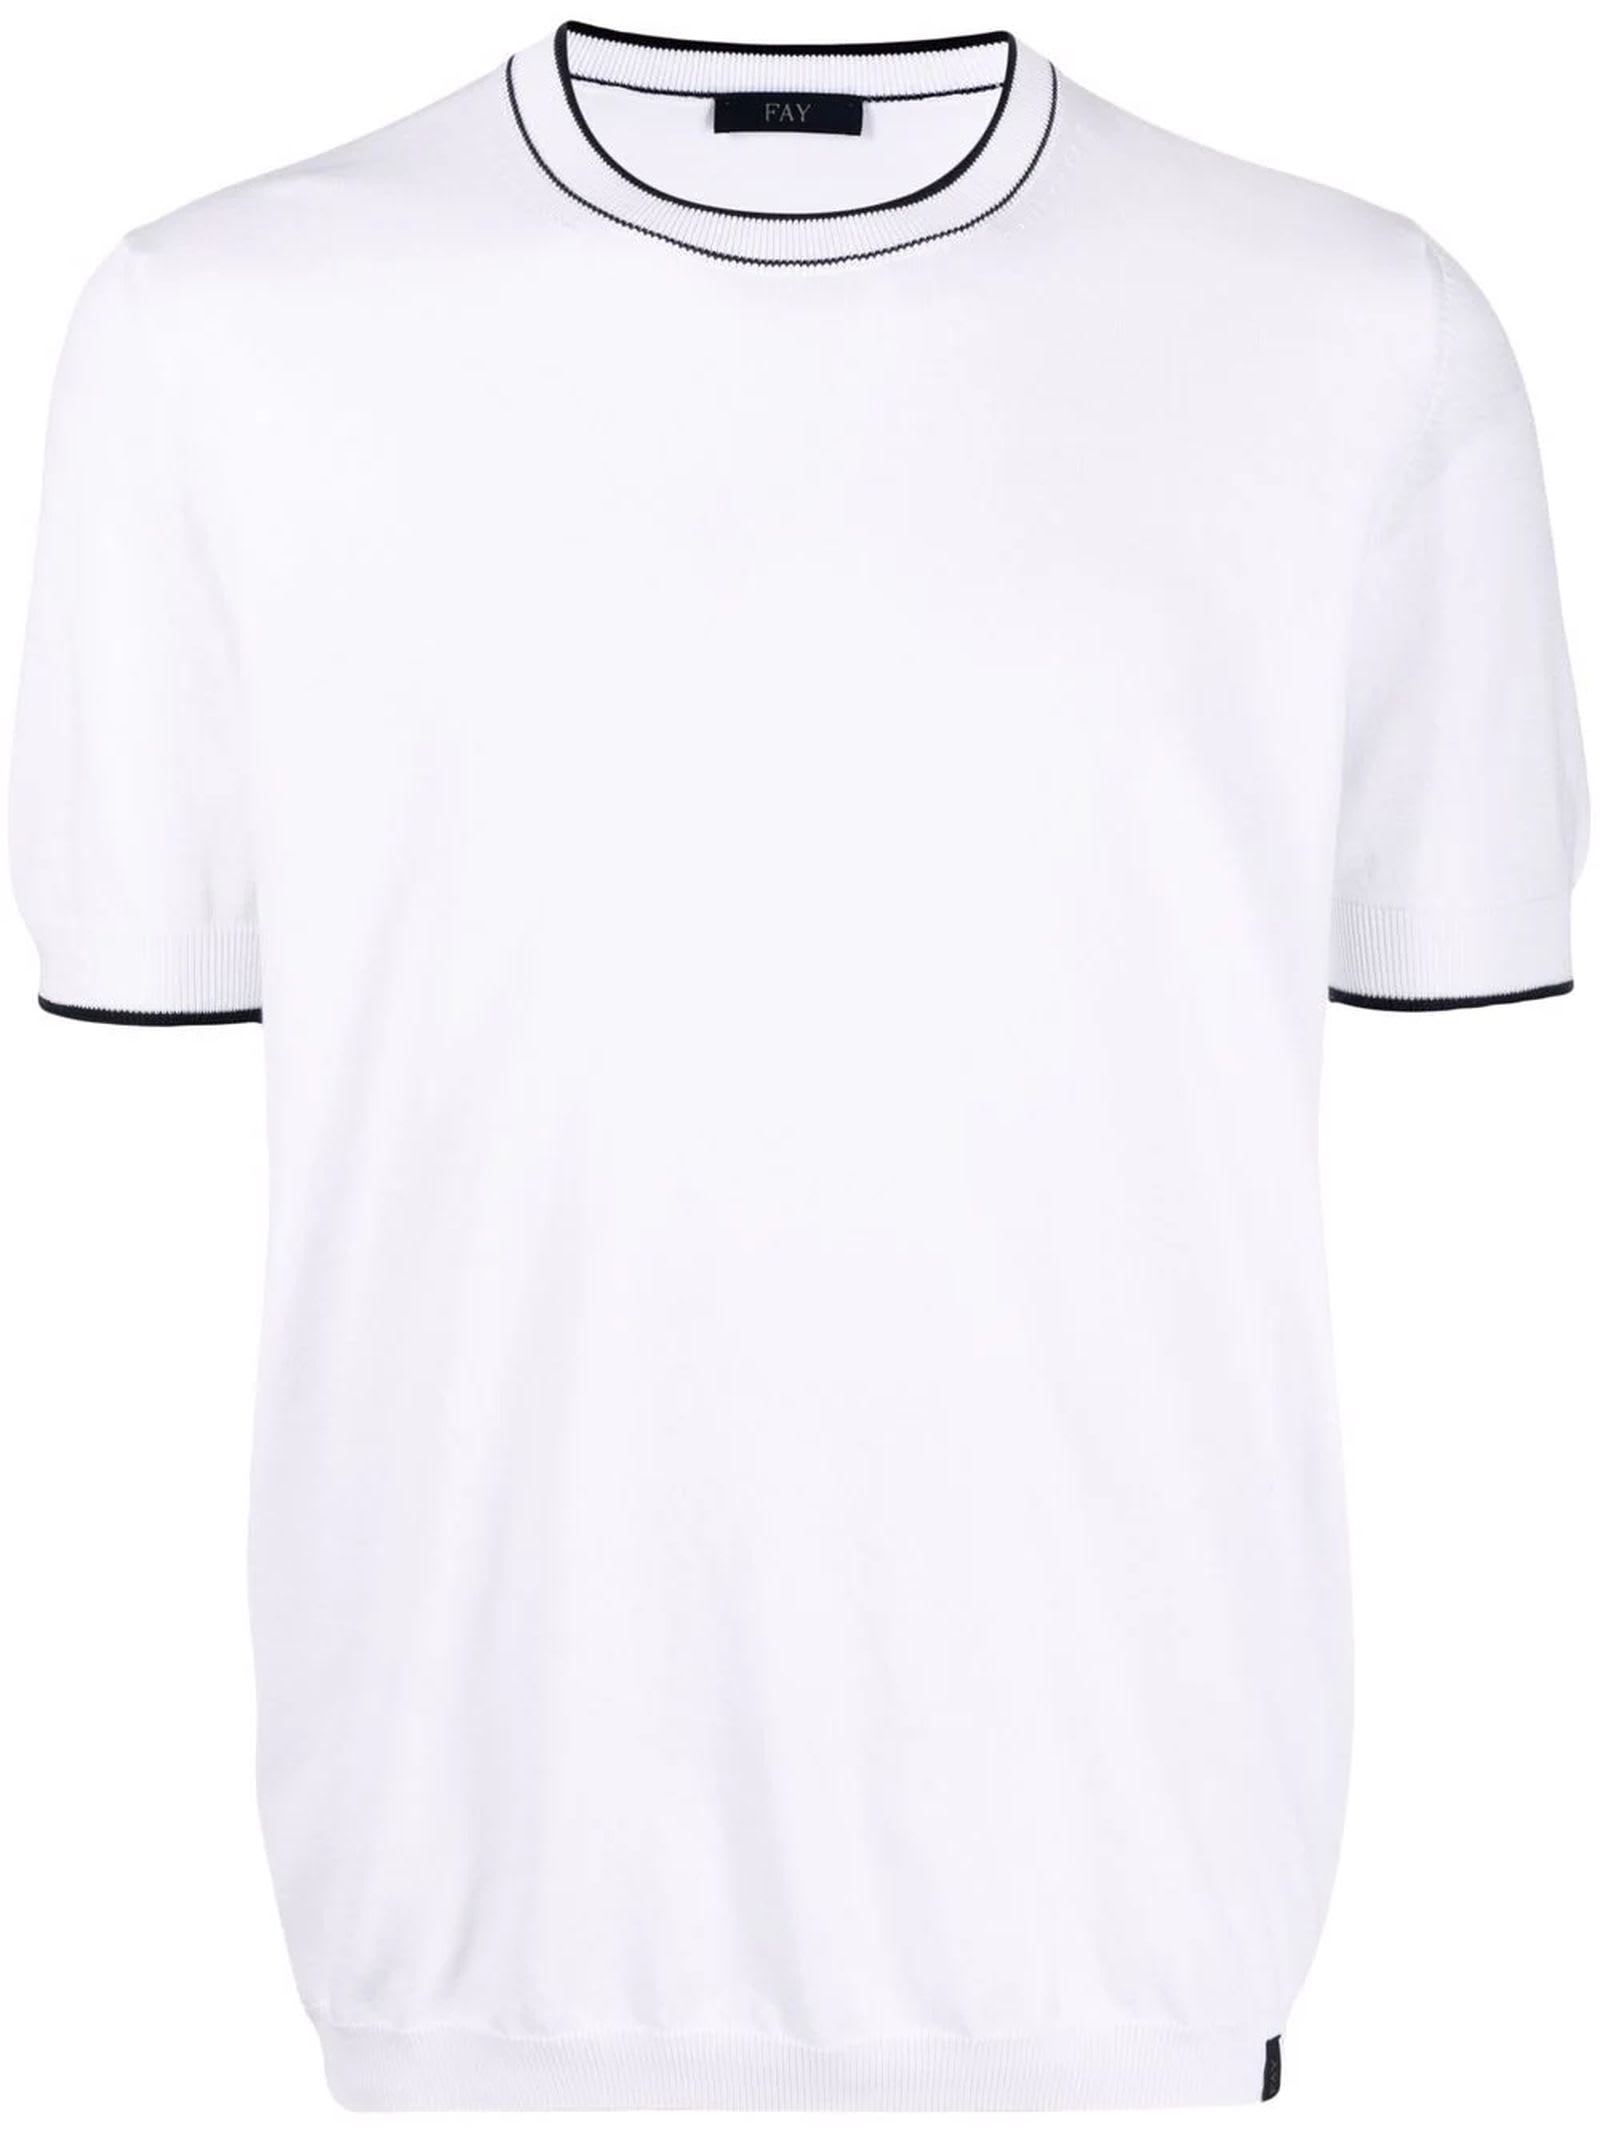 Fay T-shirt In White Cotton Knit